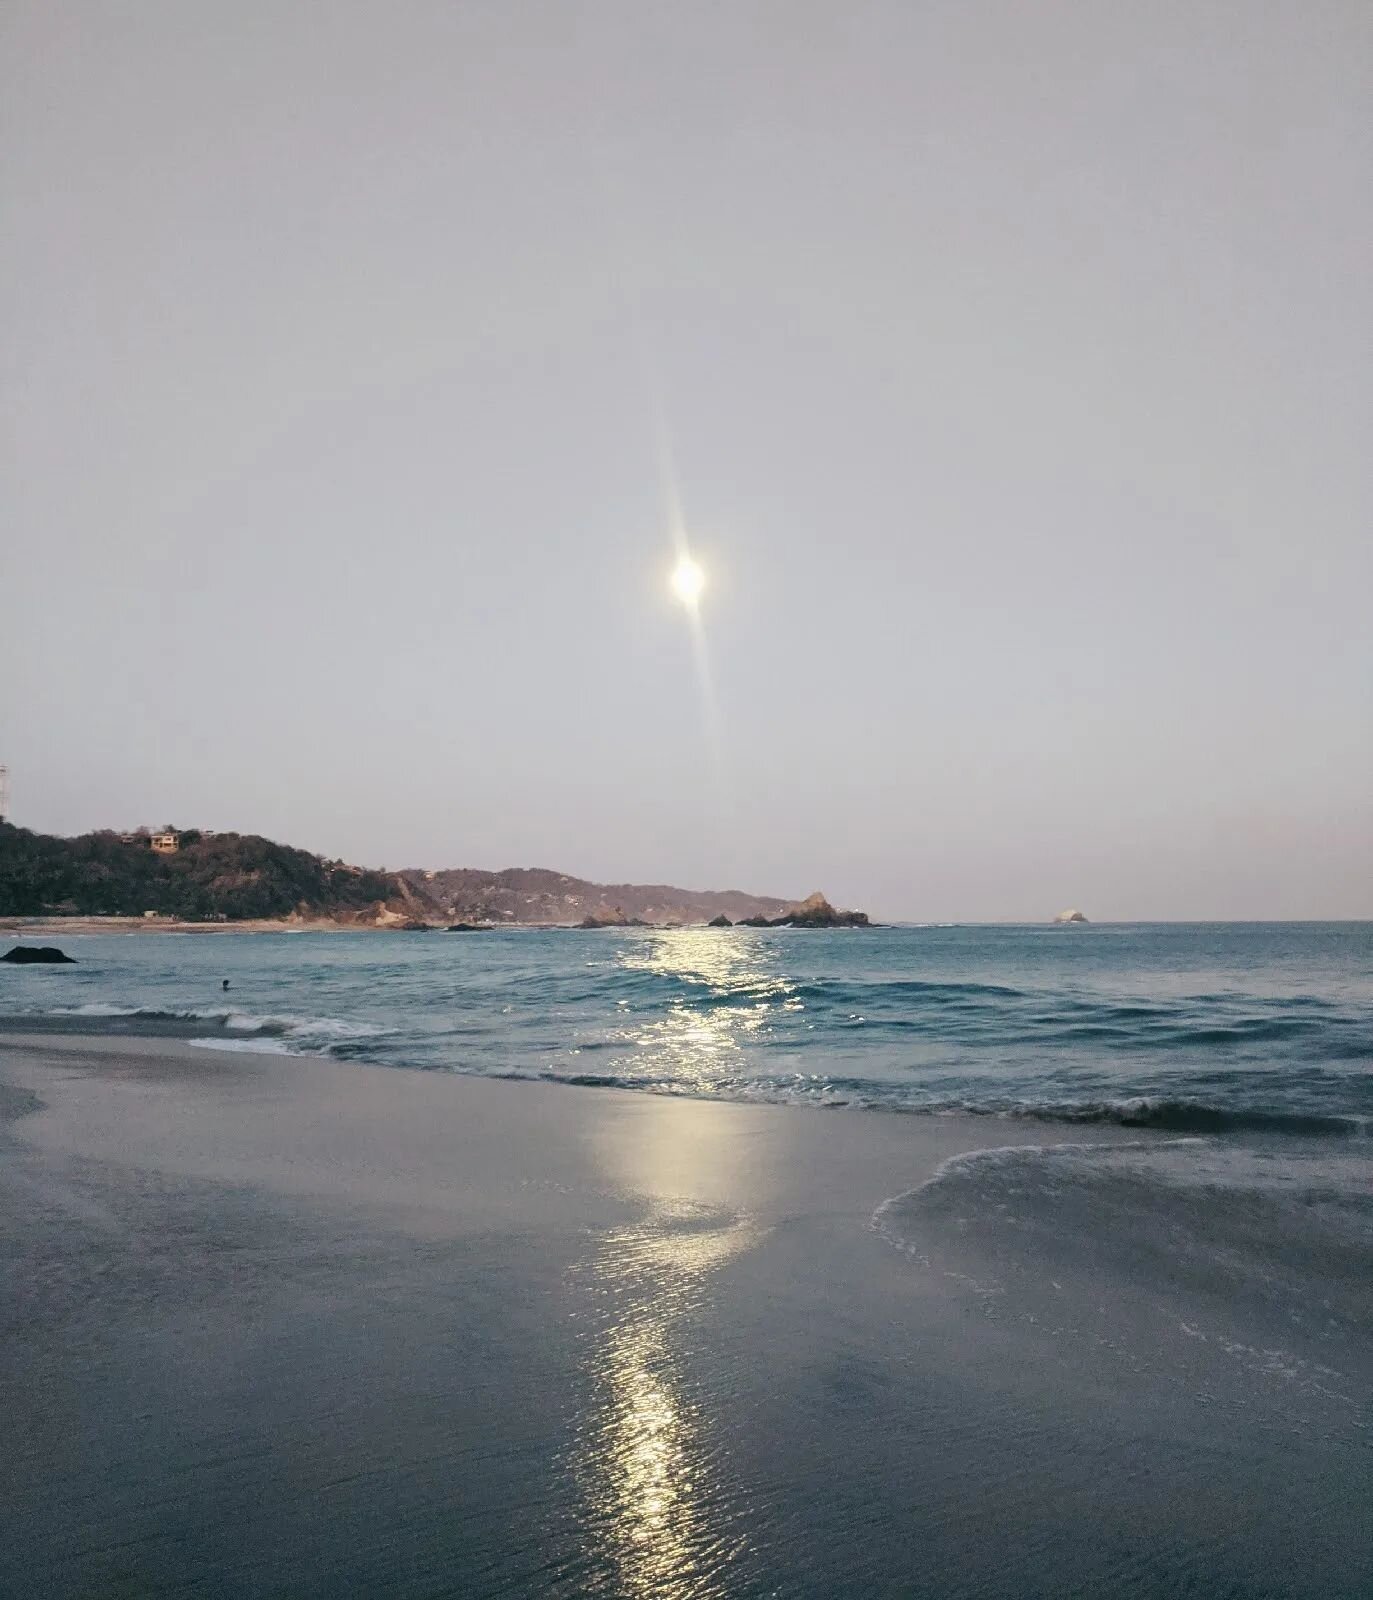 Happy full moon! 🌕🌕🌕

This Virgo moon invites us to slow down, sit with ourselves and look around us. Put your feet on the Earth, connect to your body and get clear on what is happening inside and outside of you. 

She illuminates just before the 